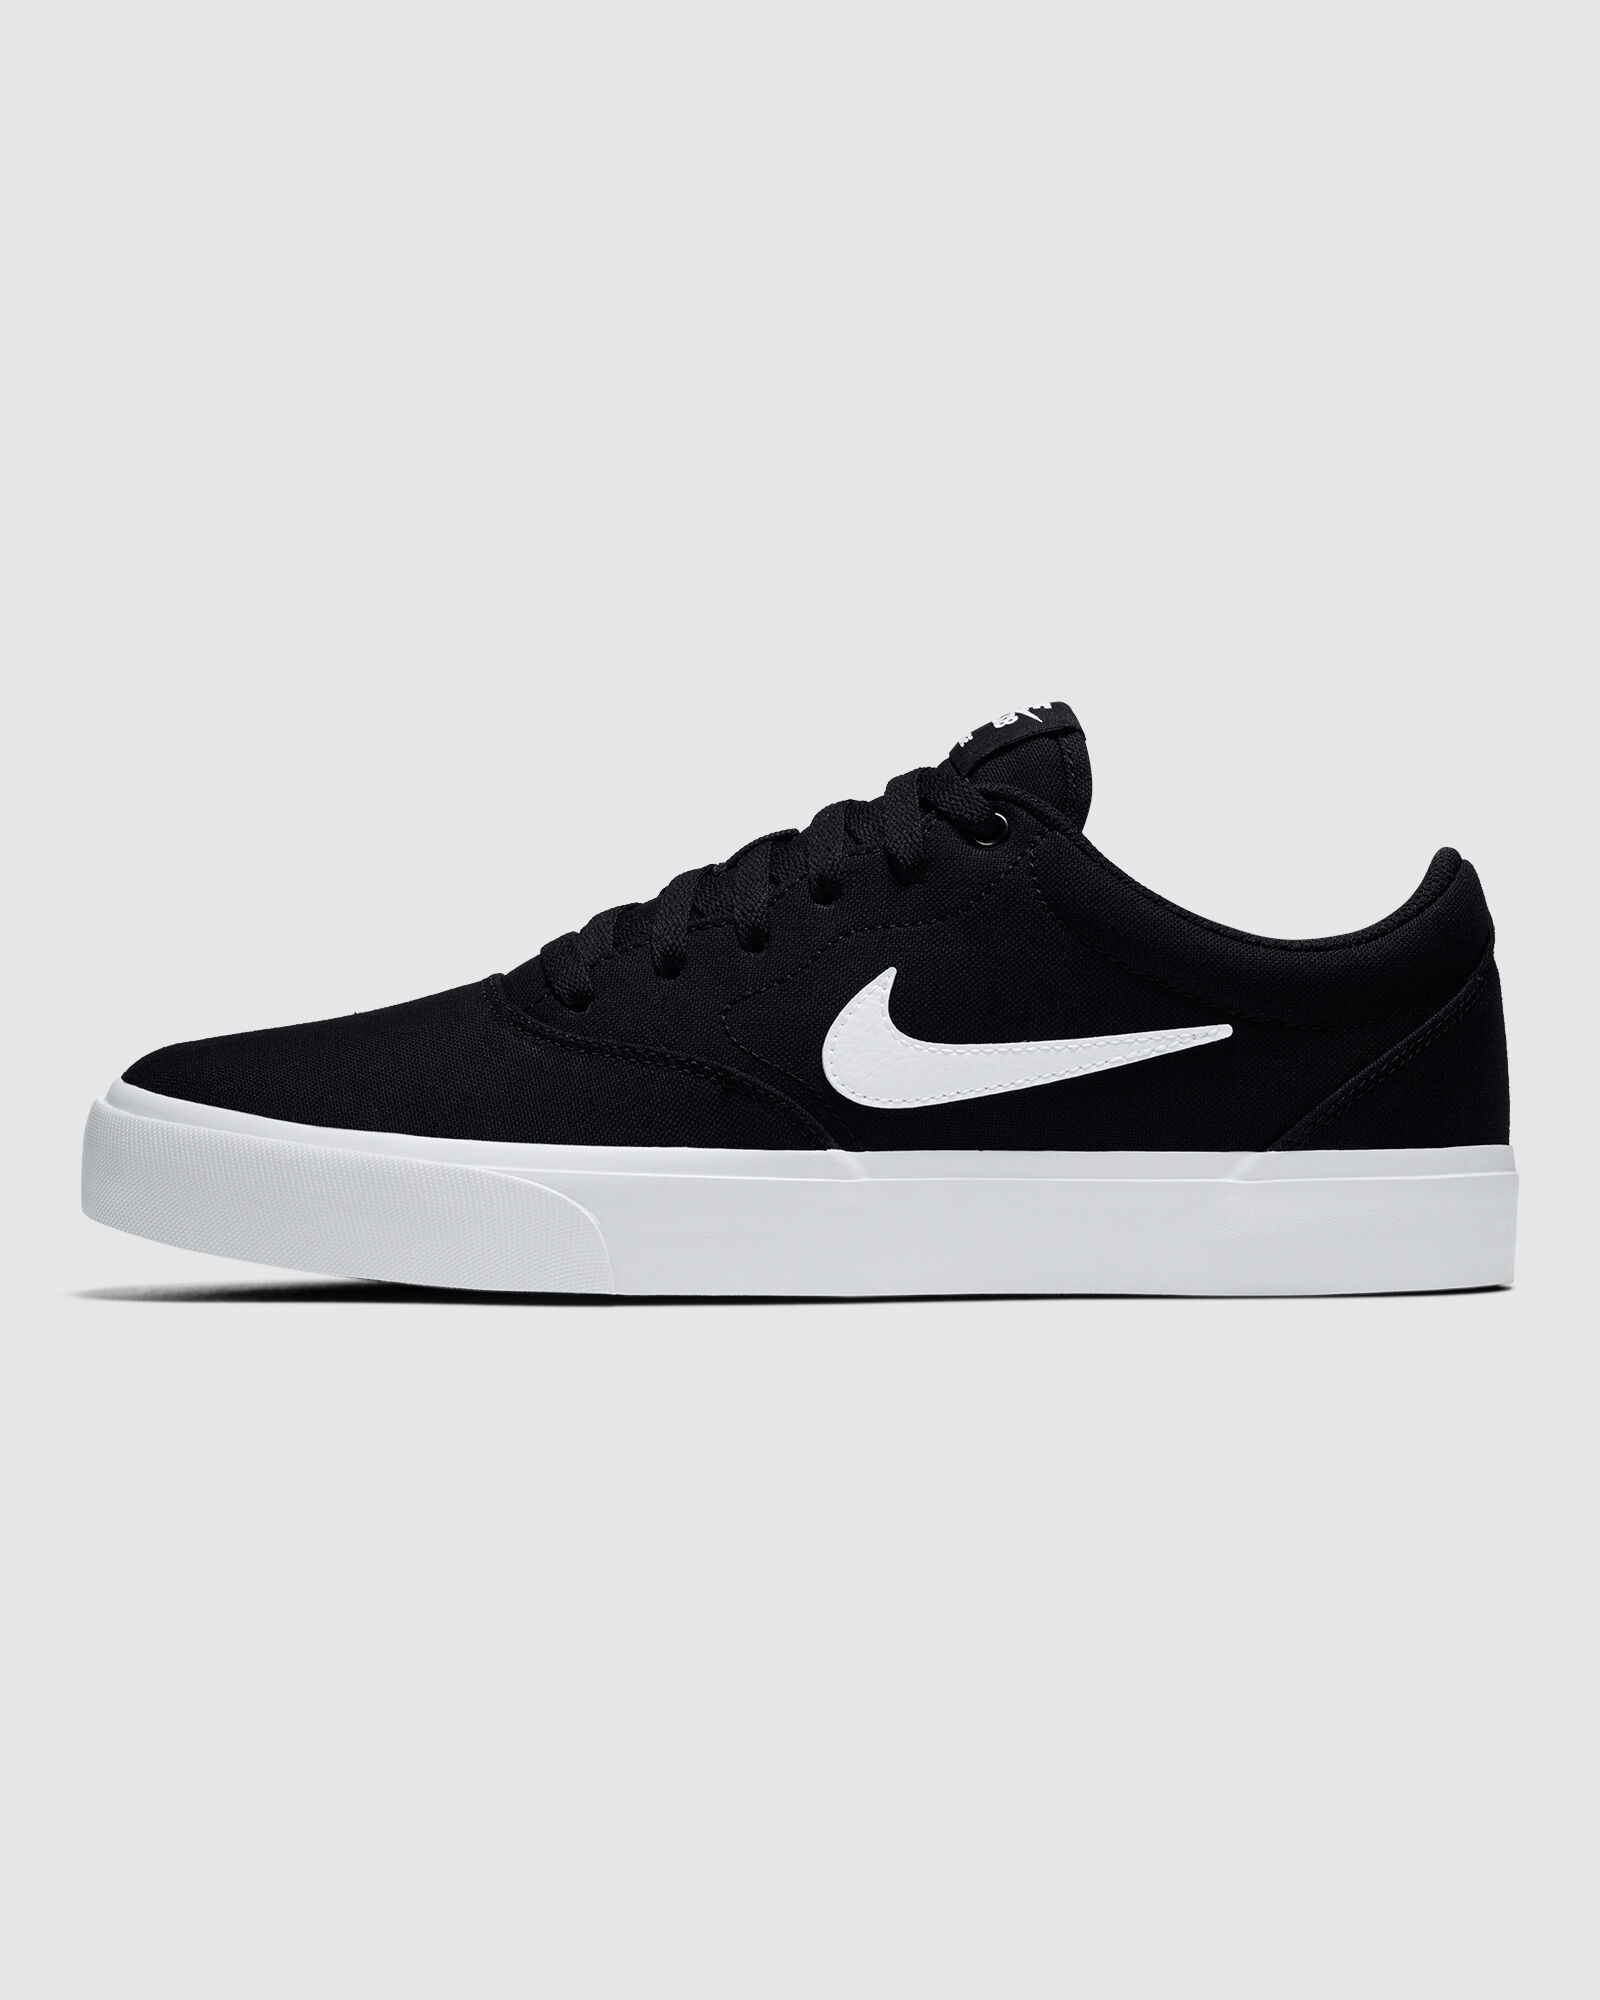 Mens Nike Sb Charge Canvas Blk/wht by 